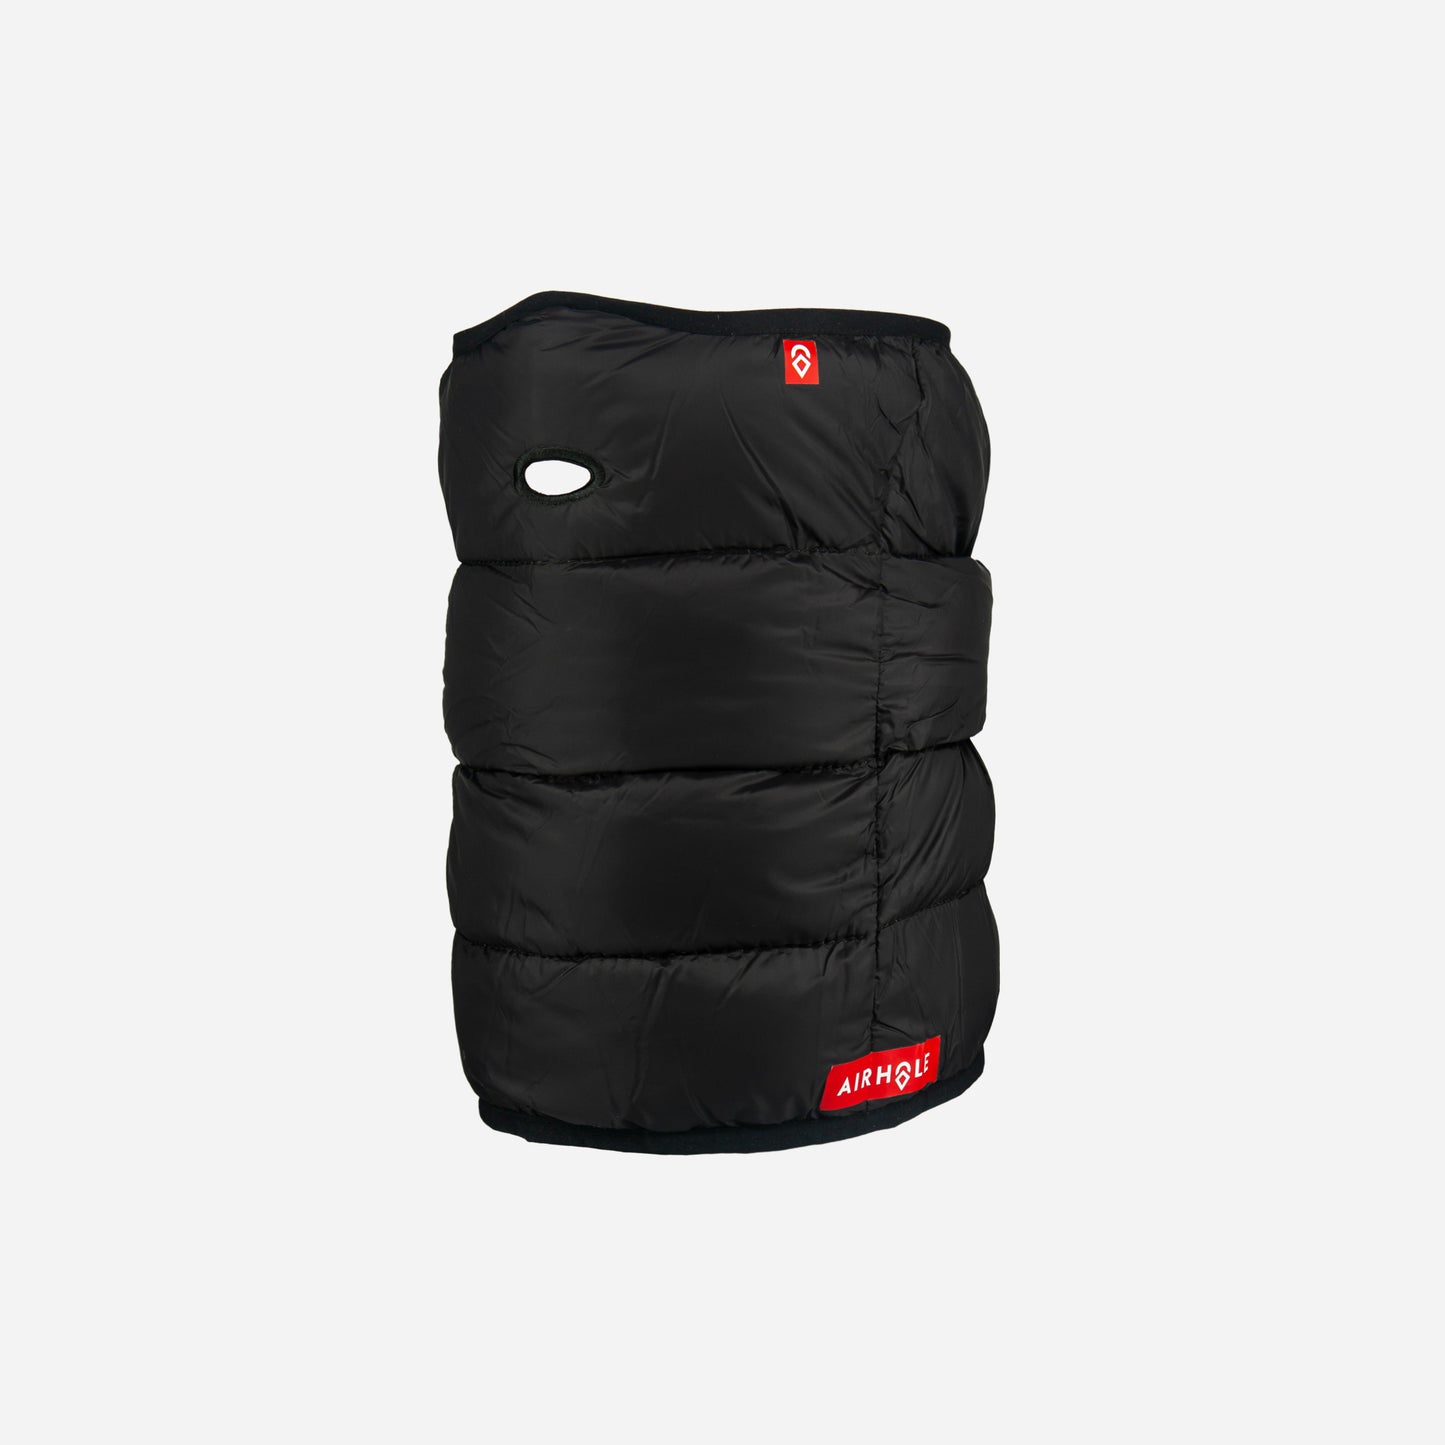 Airhole Airhood Packable Insulated